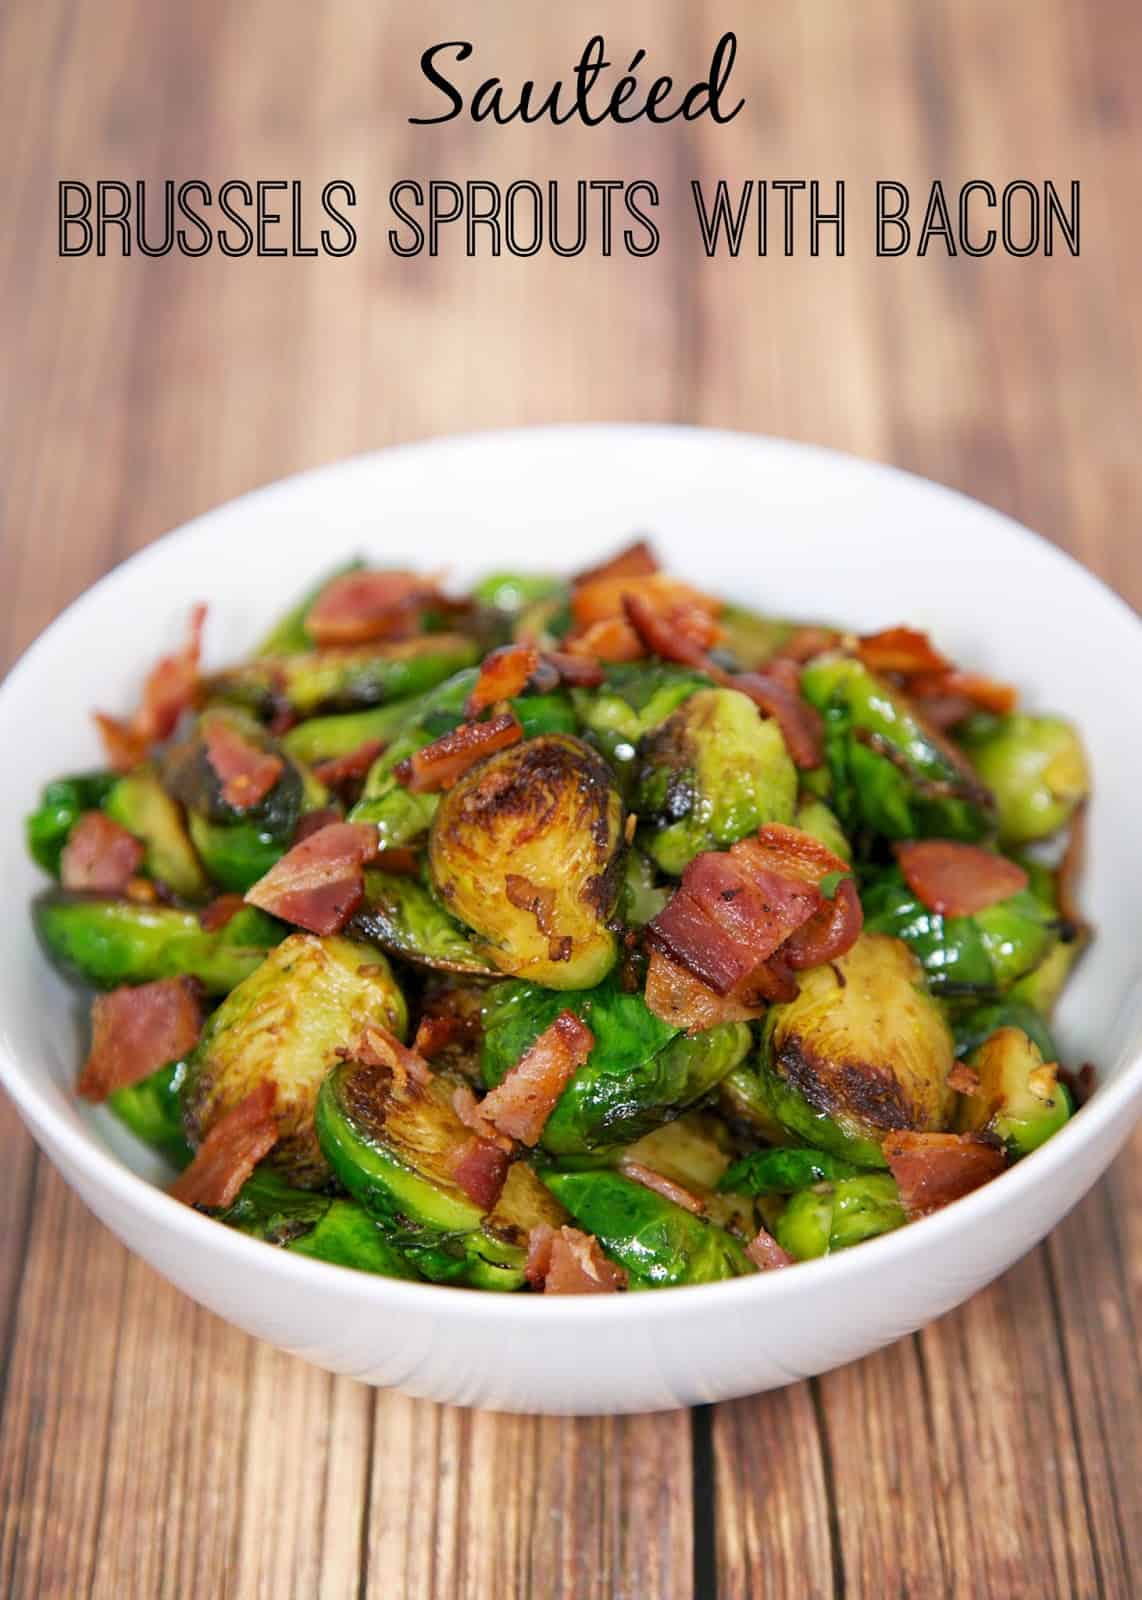 Sautéed Brussels Sprouts with Bacon - just like our favorite restaurant! Ready in about 10 minutes! Great weeknight side dish.